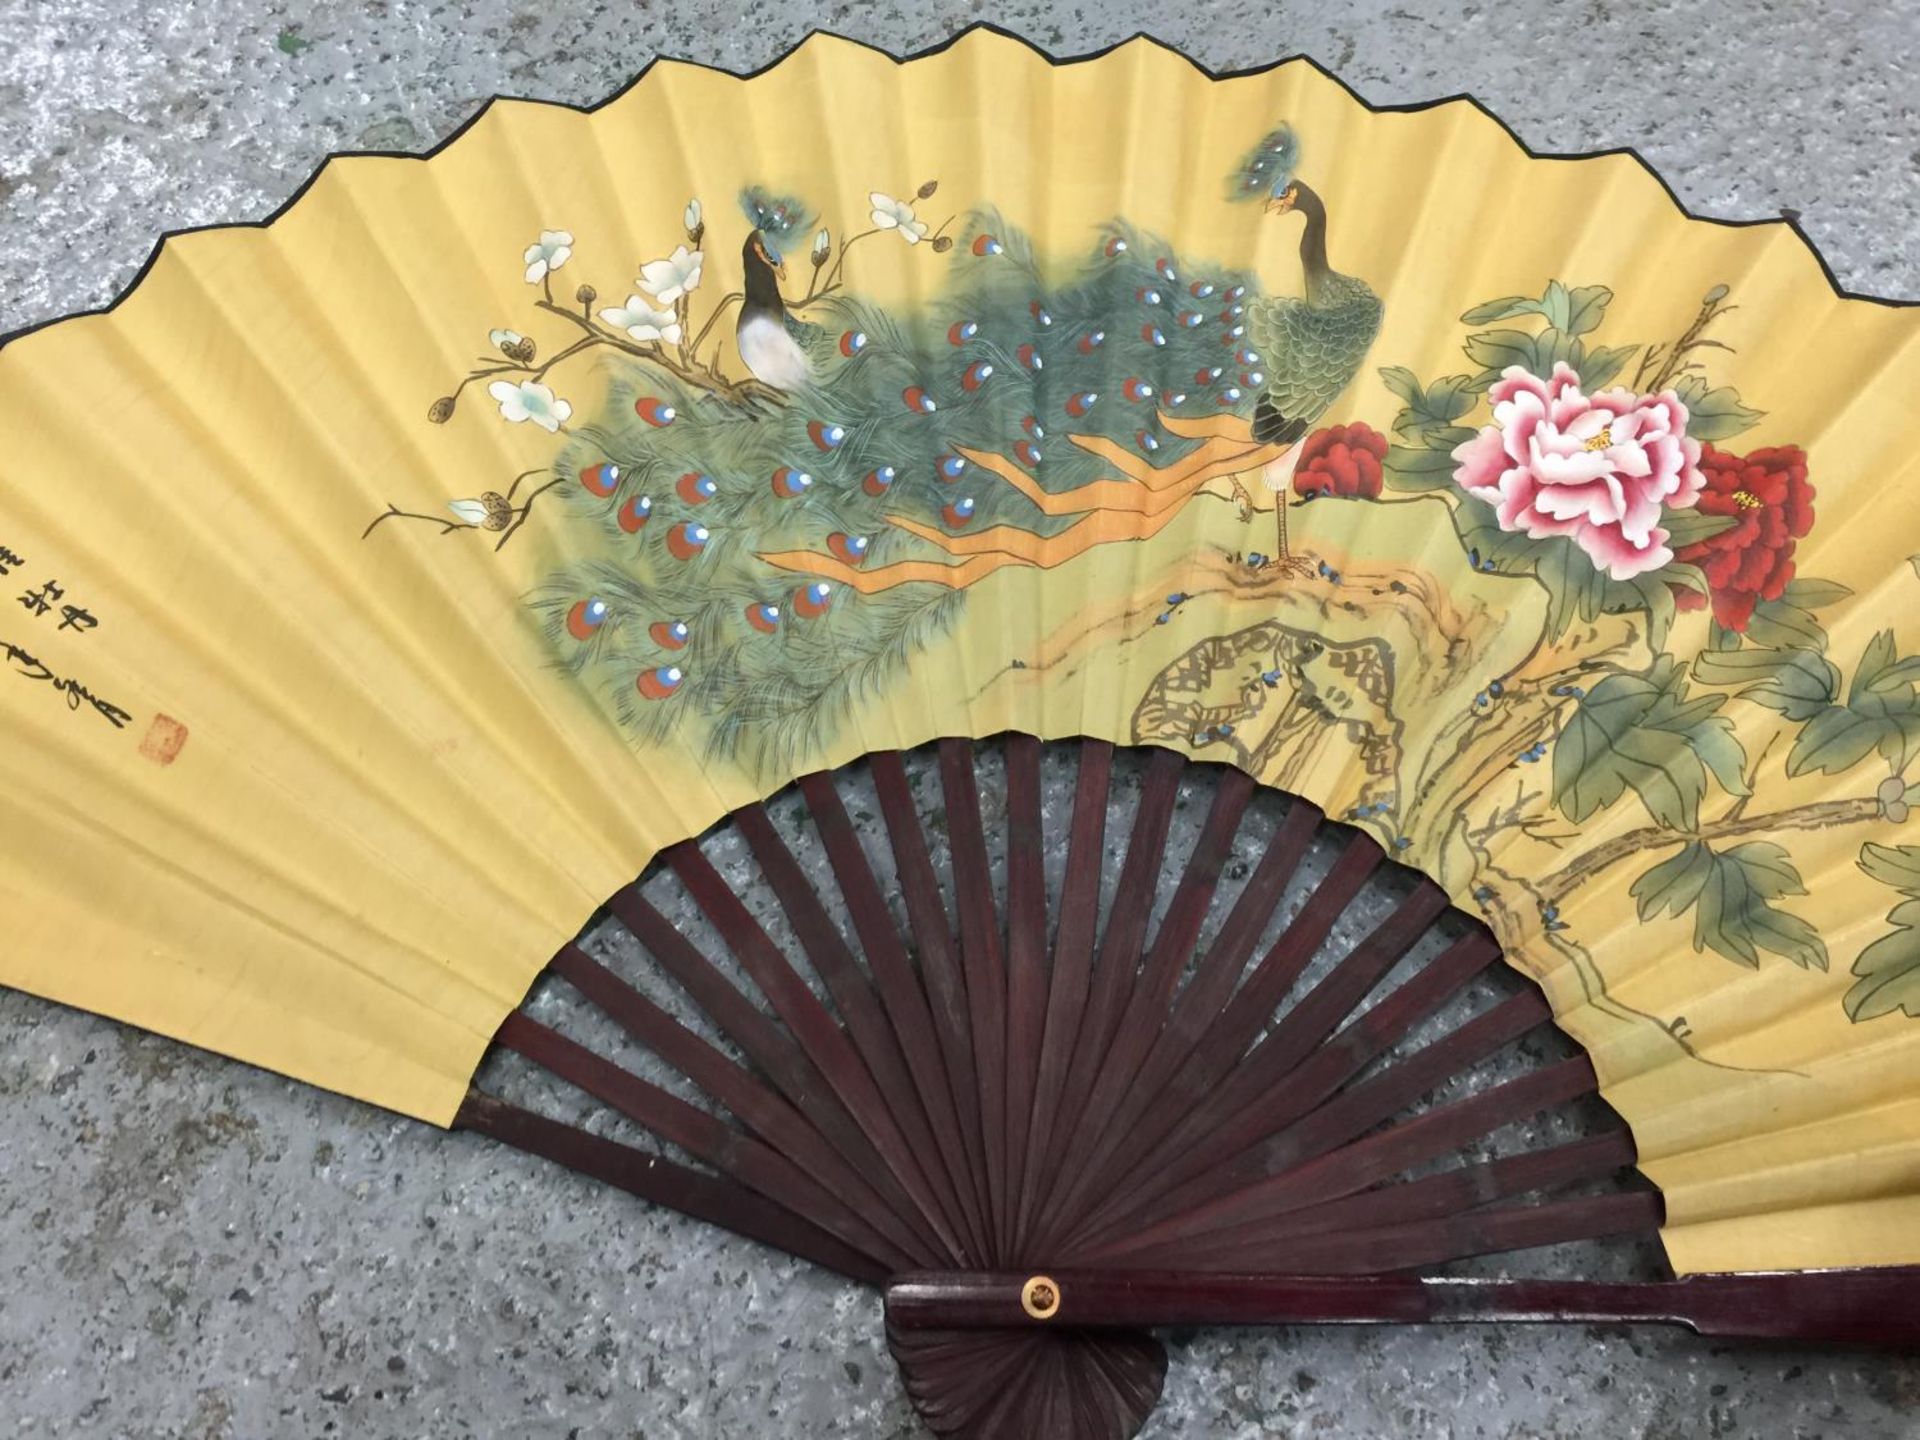 TWO LARGE HANDPAINTED EASTERN FANS AND A HANDPAINTED PARASOL - Image 10 of 12